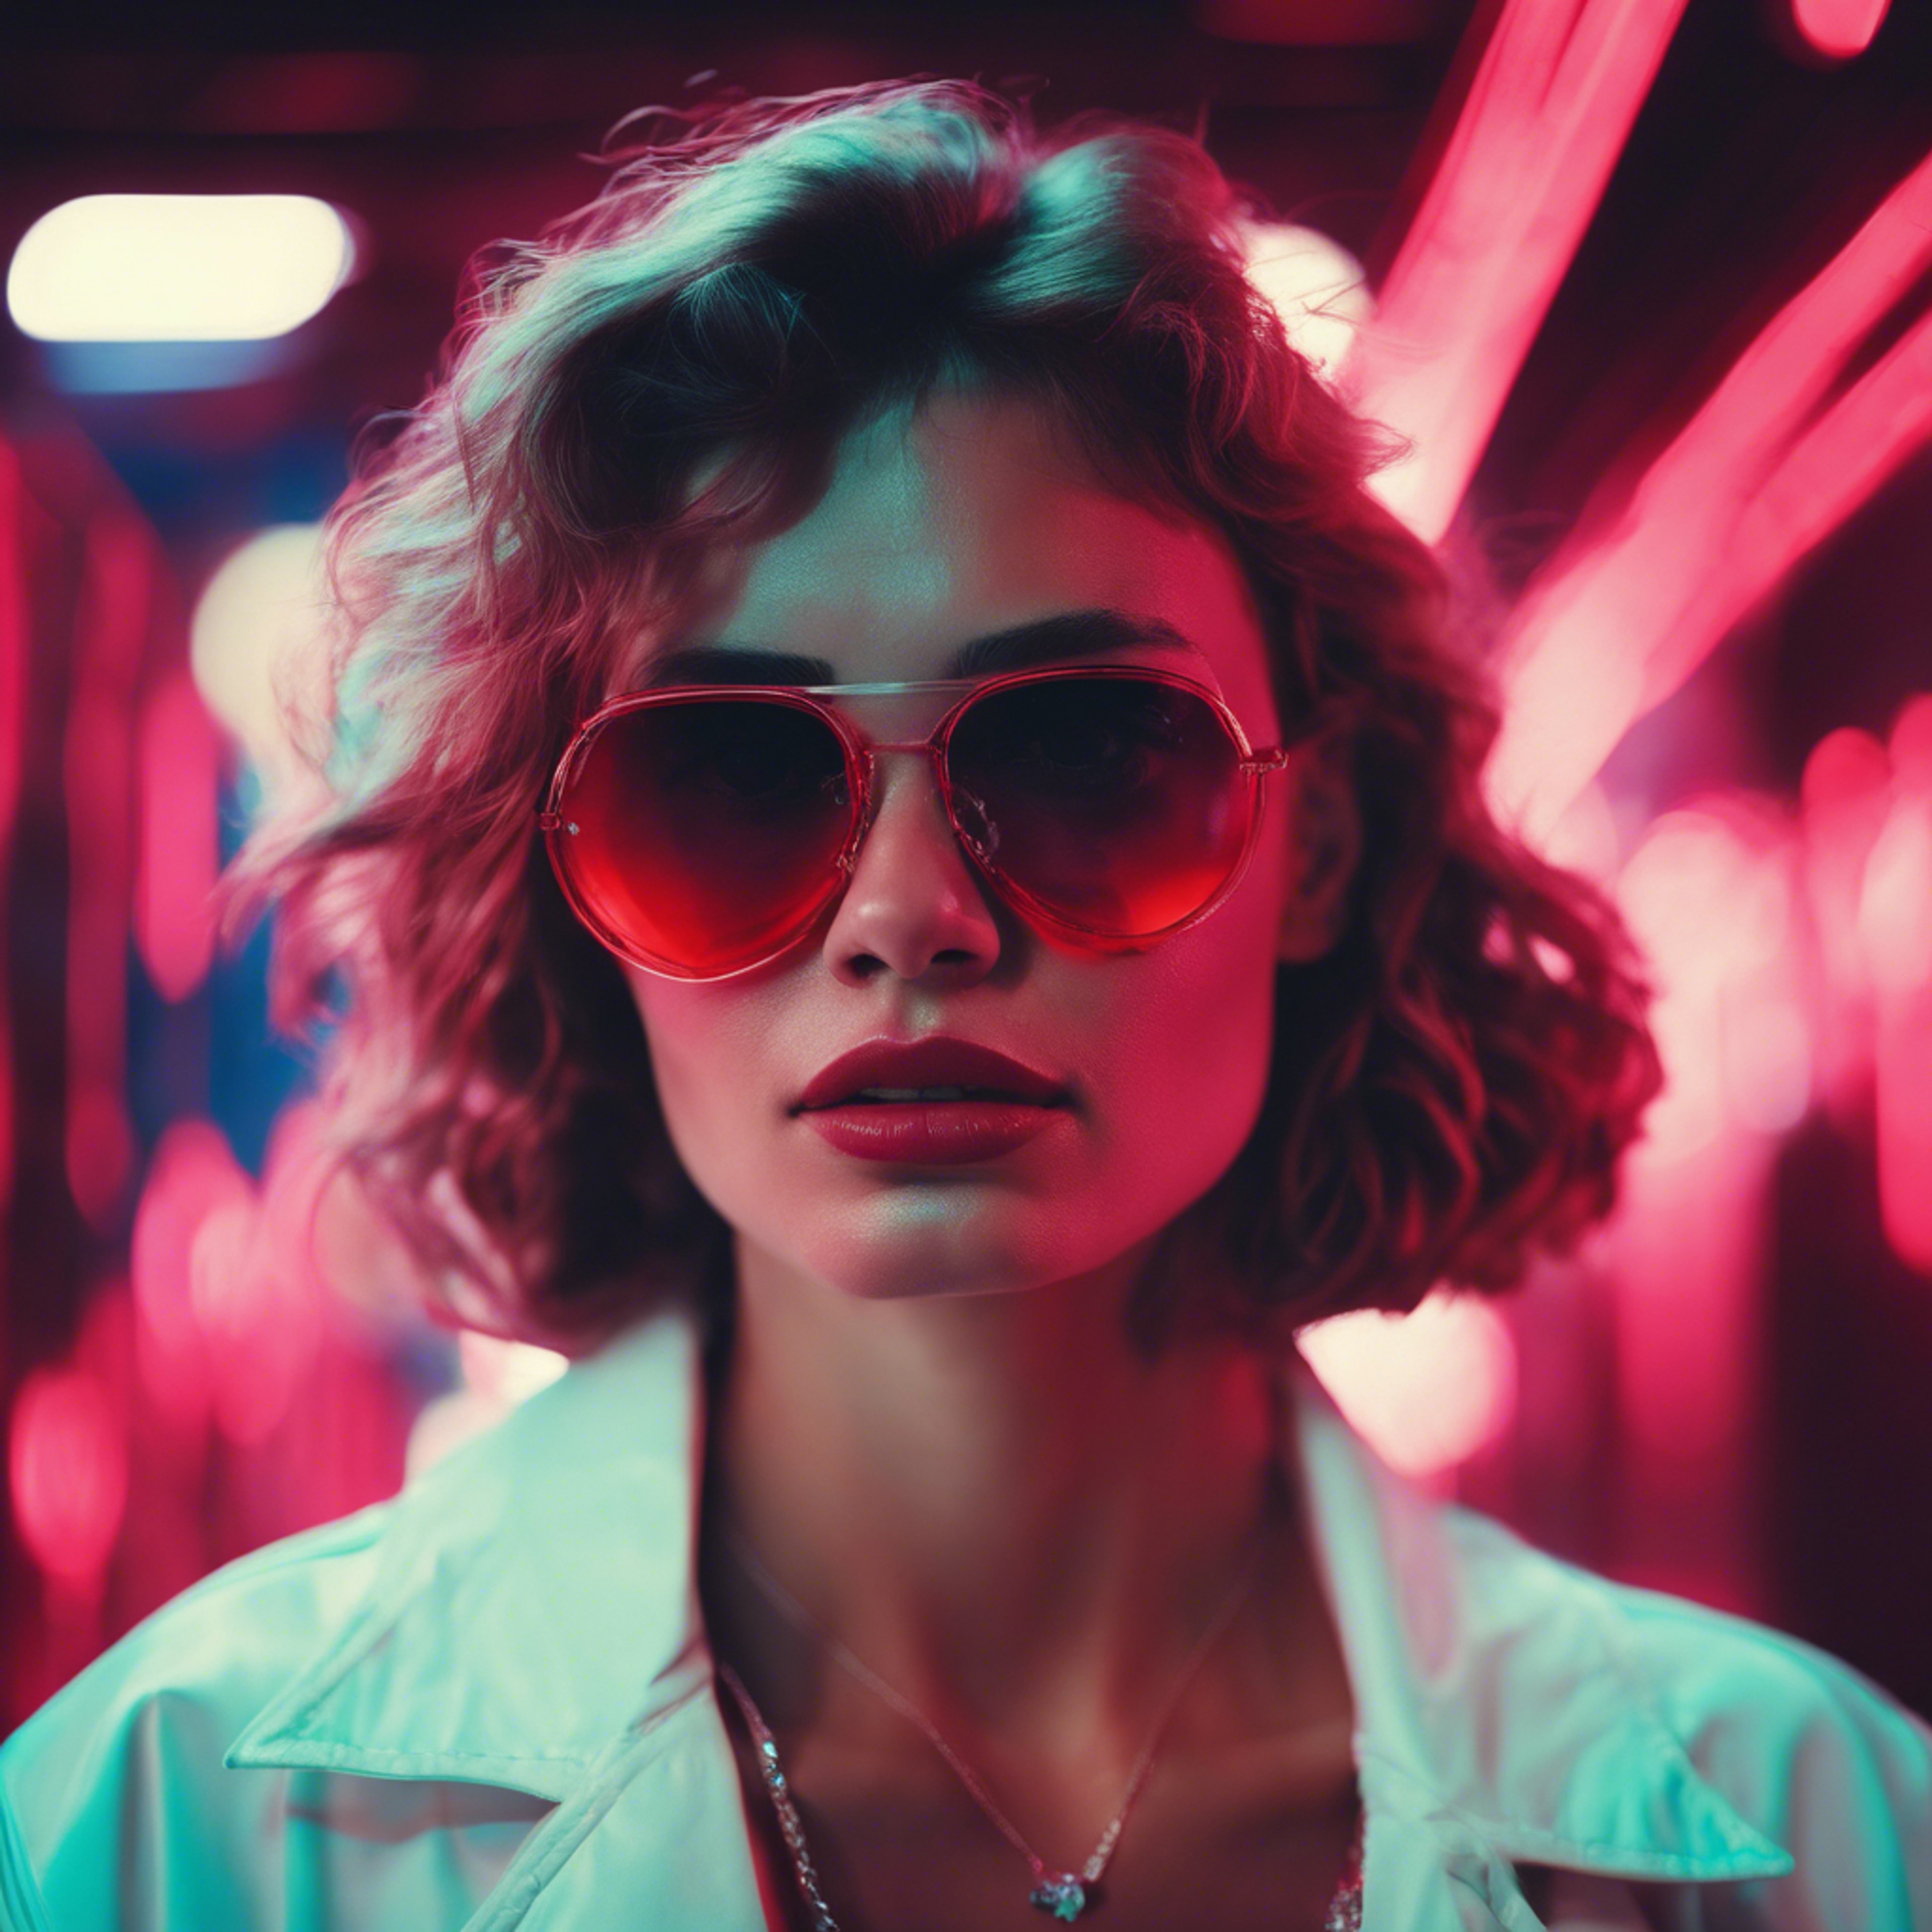 Retro 80's style portrait of a woman in sunglasses lit by cool red neon lights. Tapeta na zeď[9fb655559f07479e9c29]